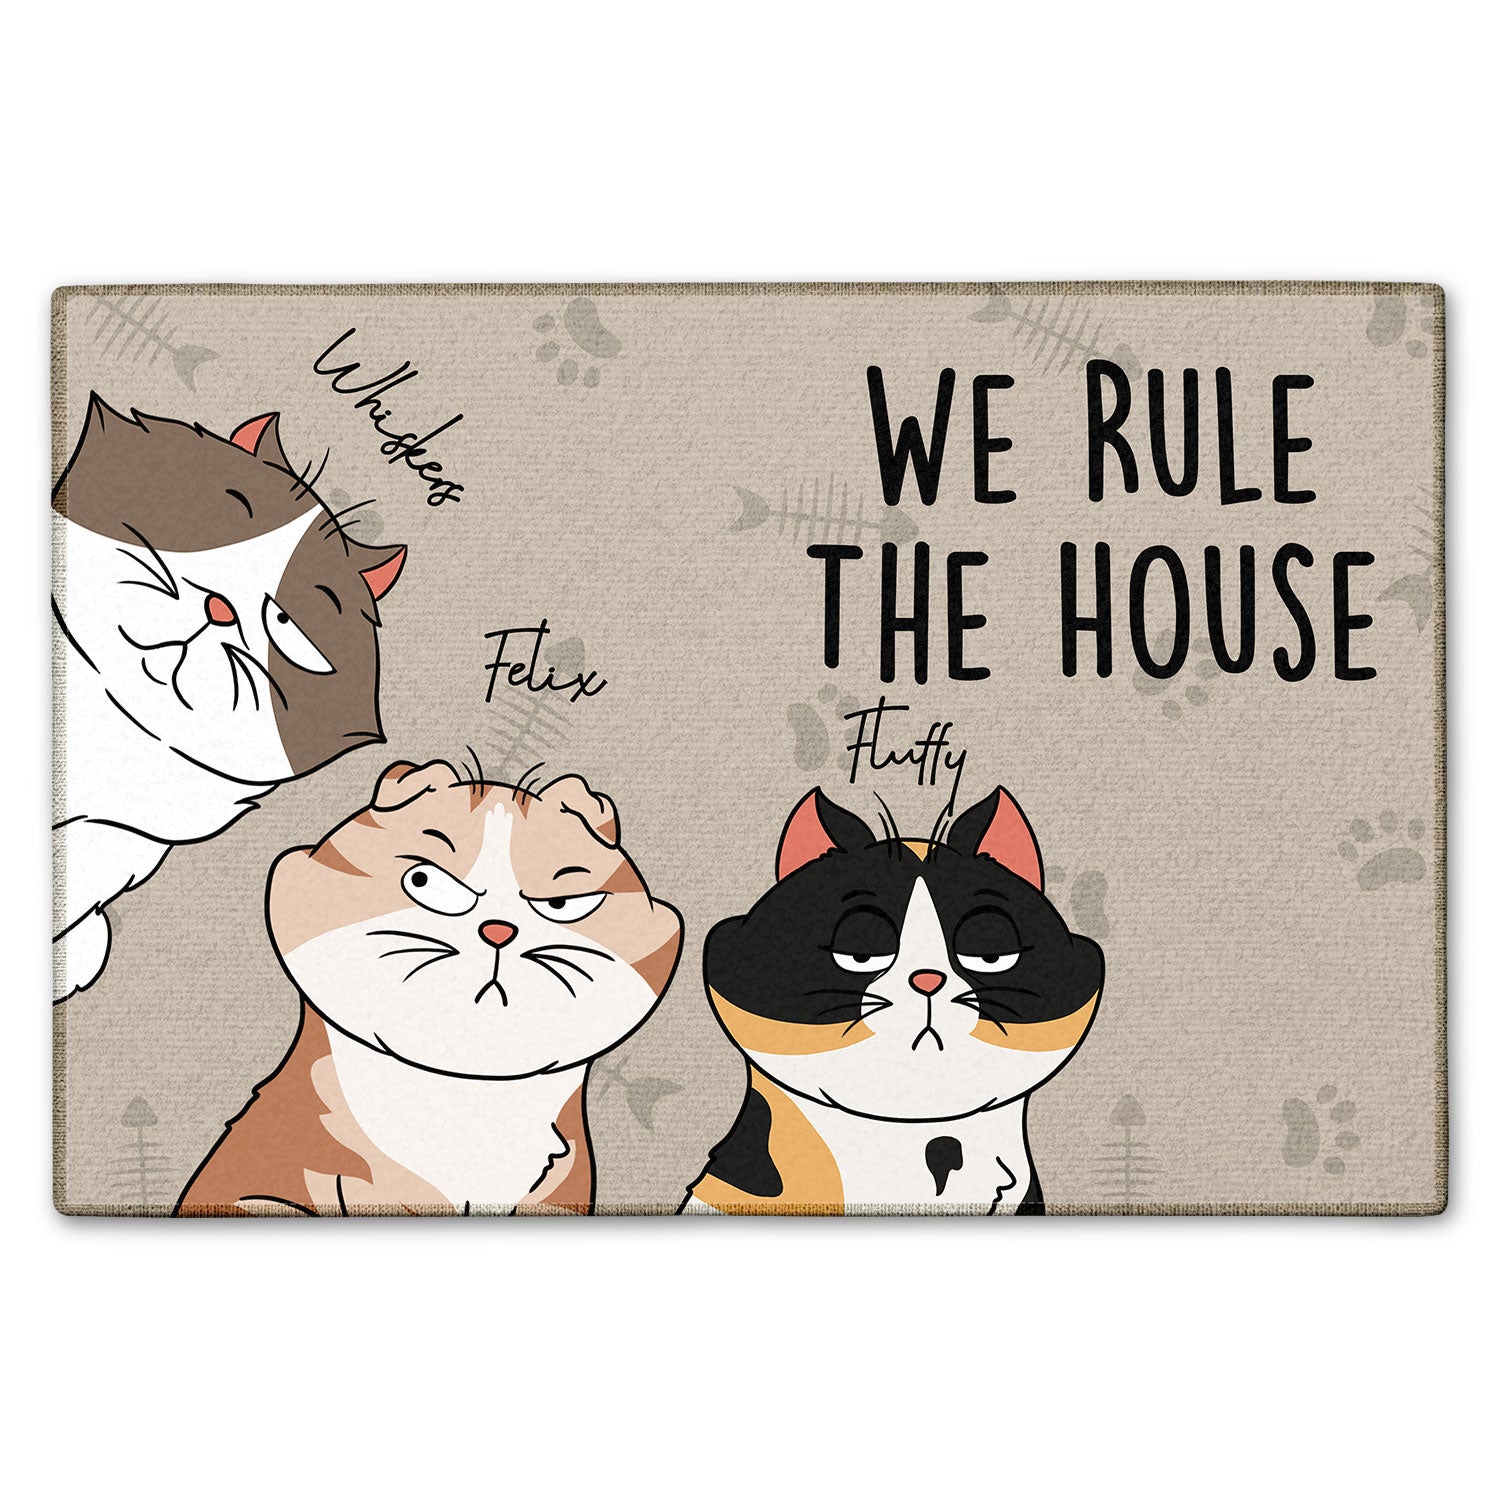 We Rule The House Cat Version - Home Decor, Birthday, Funny, Housewarming Gift For Cat Lovers - Personalized Doormat